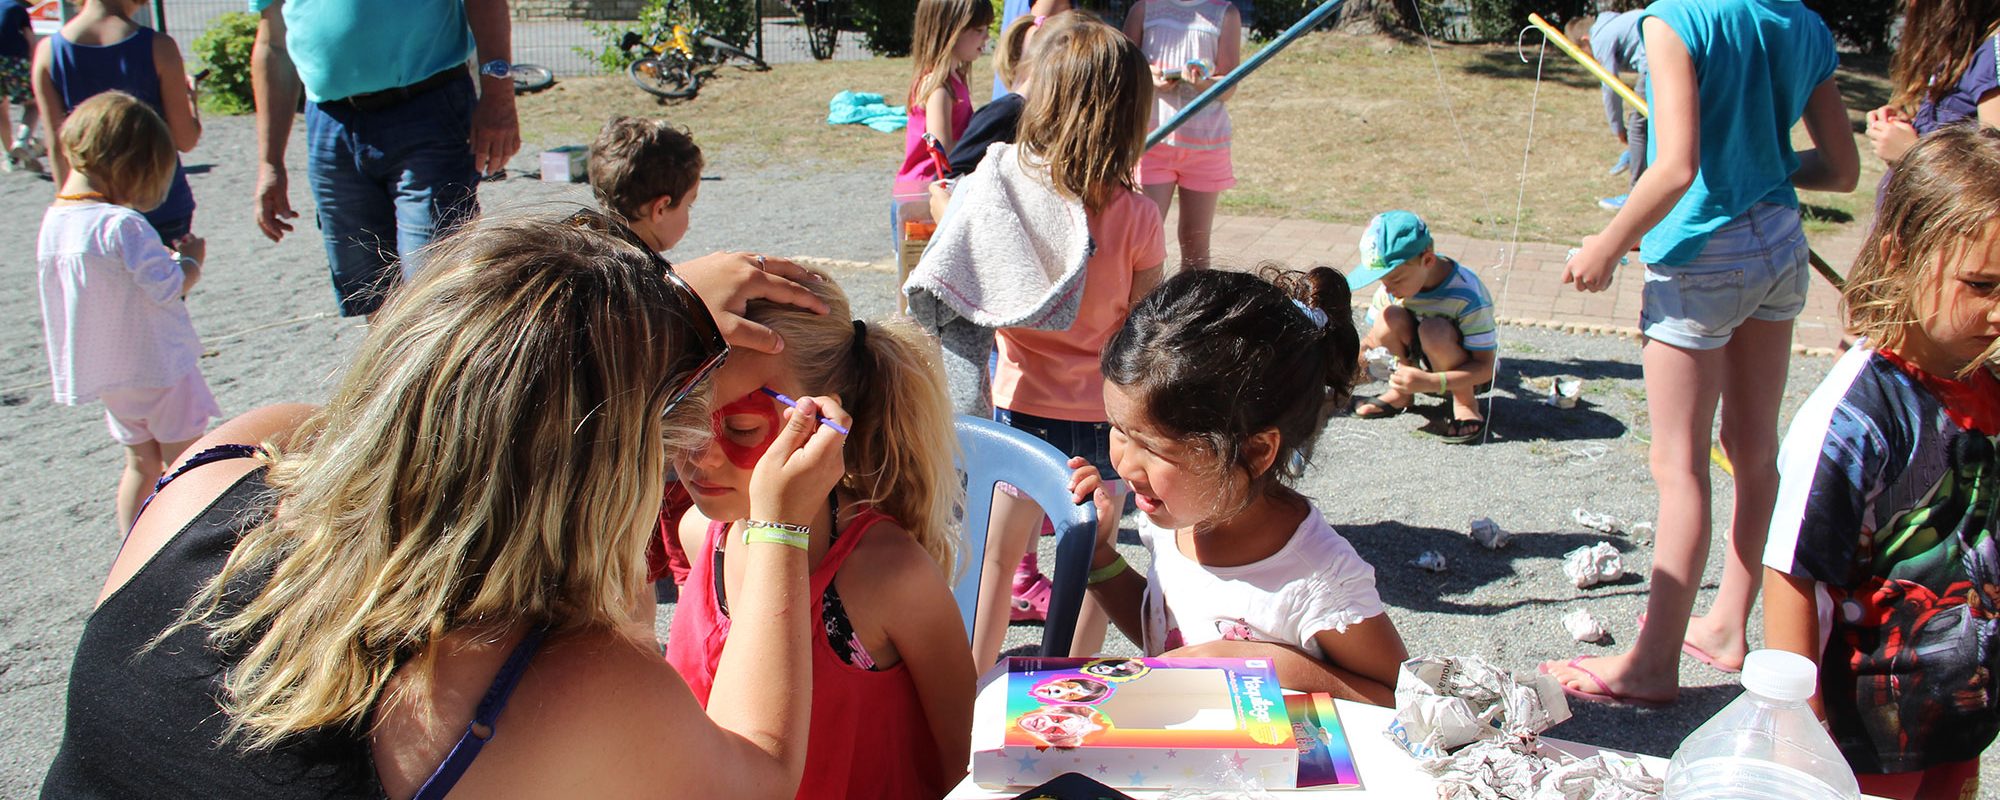 Atelier maquillage au camping